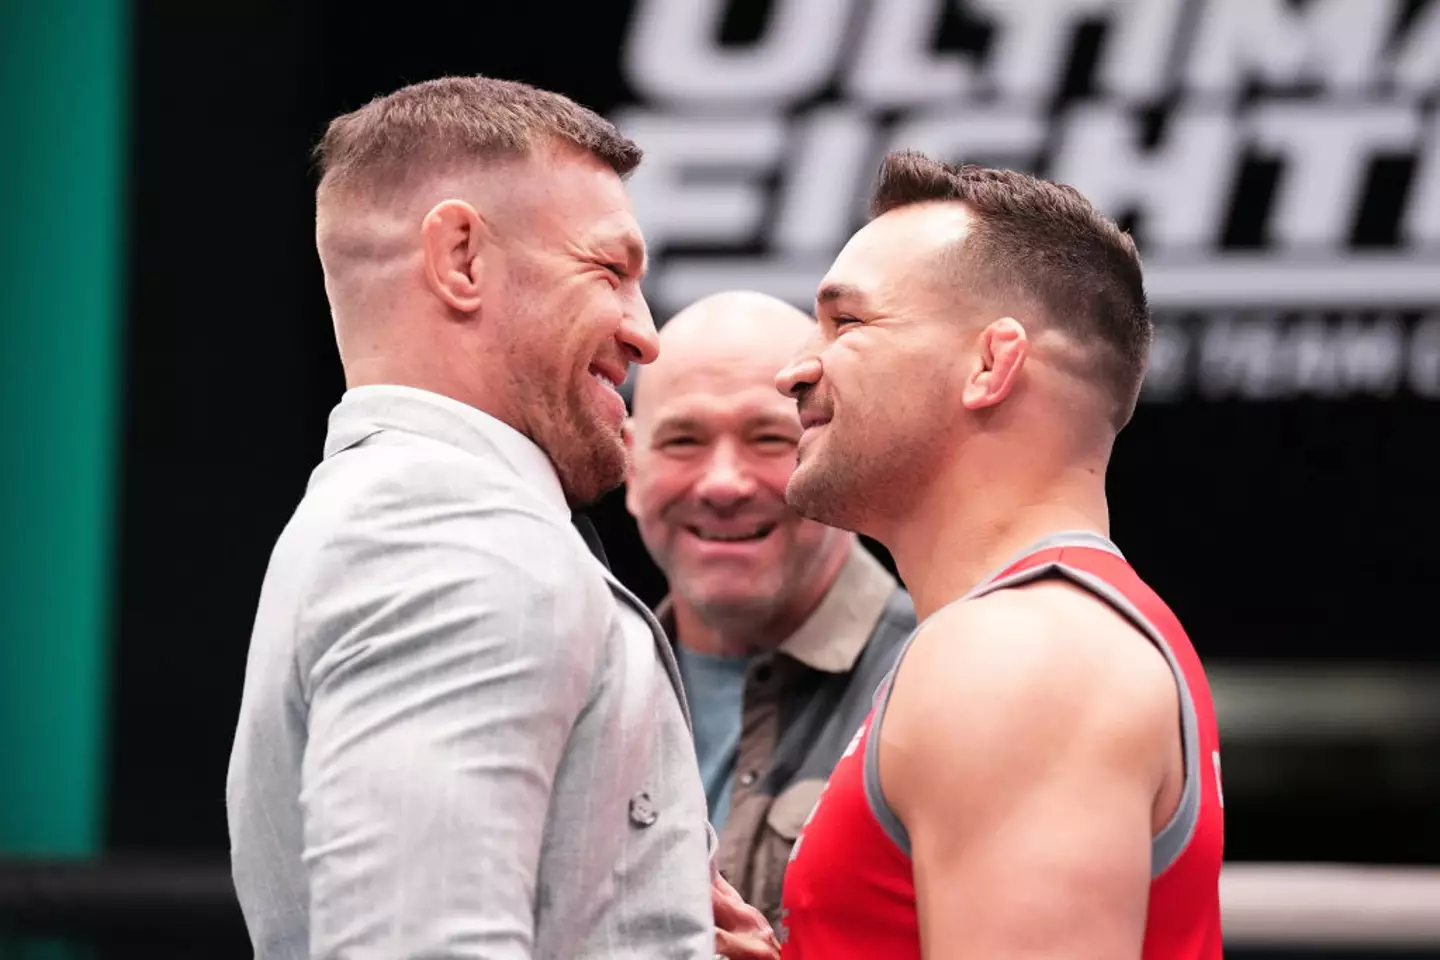 Chandler is set to fight McGregor this summer (Image: Getty)